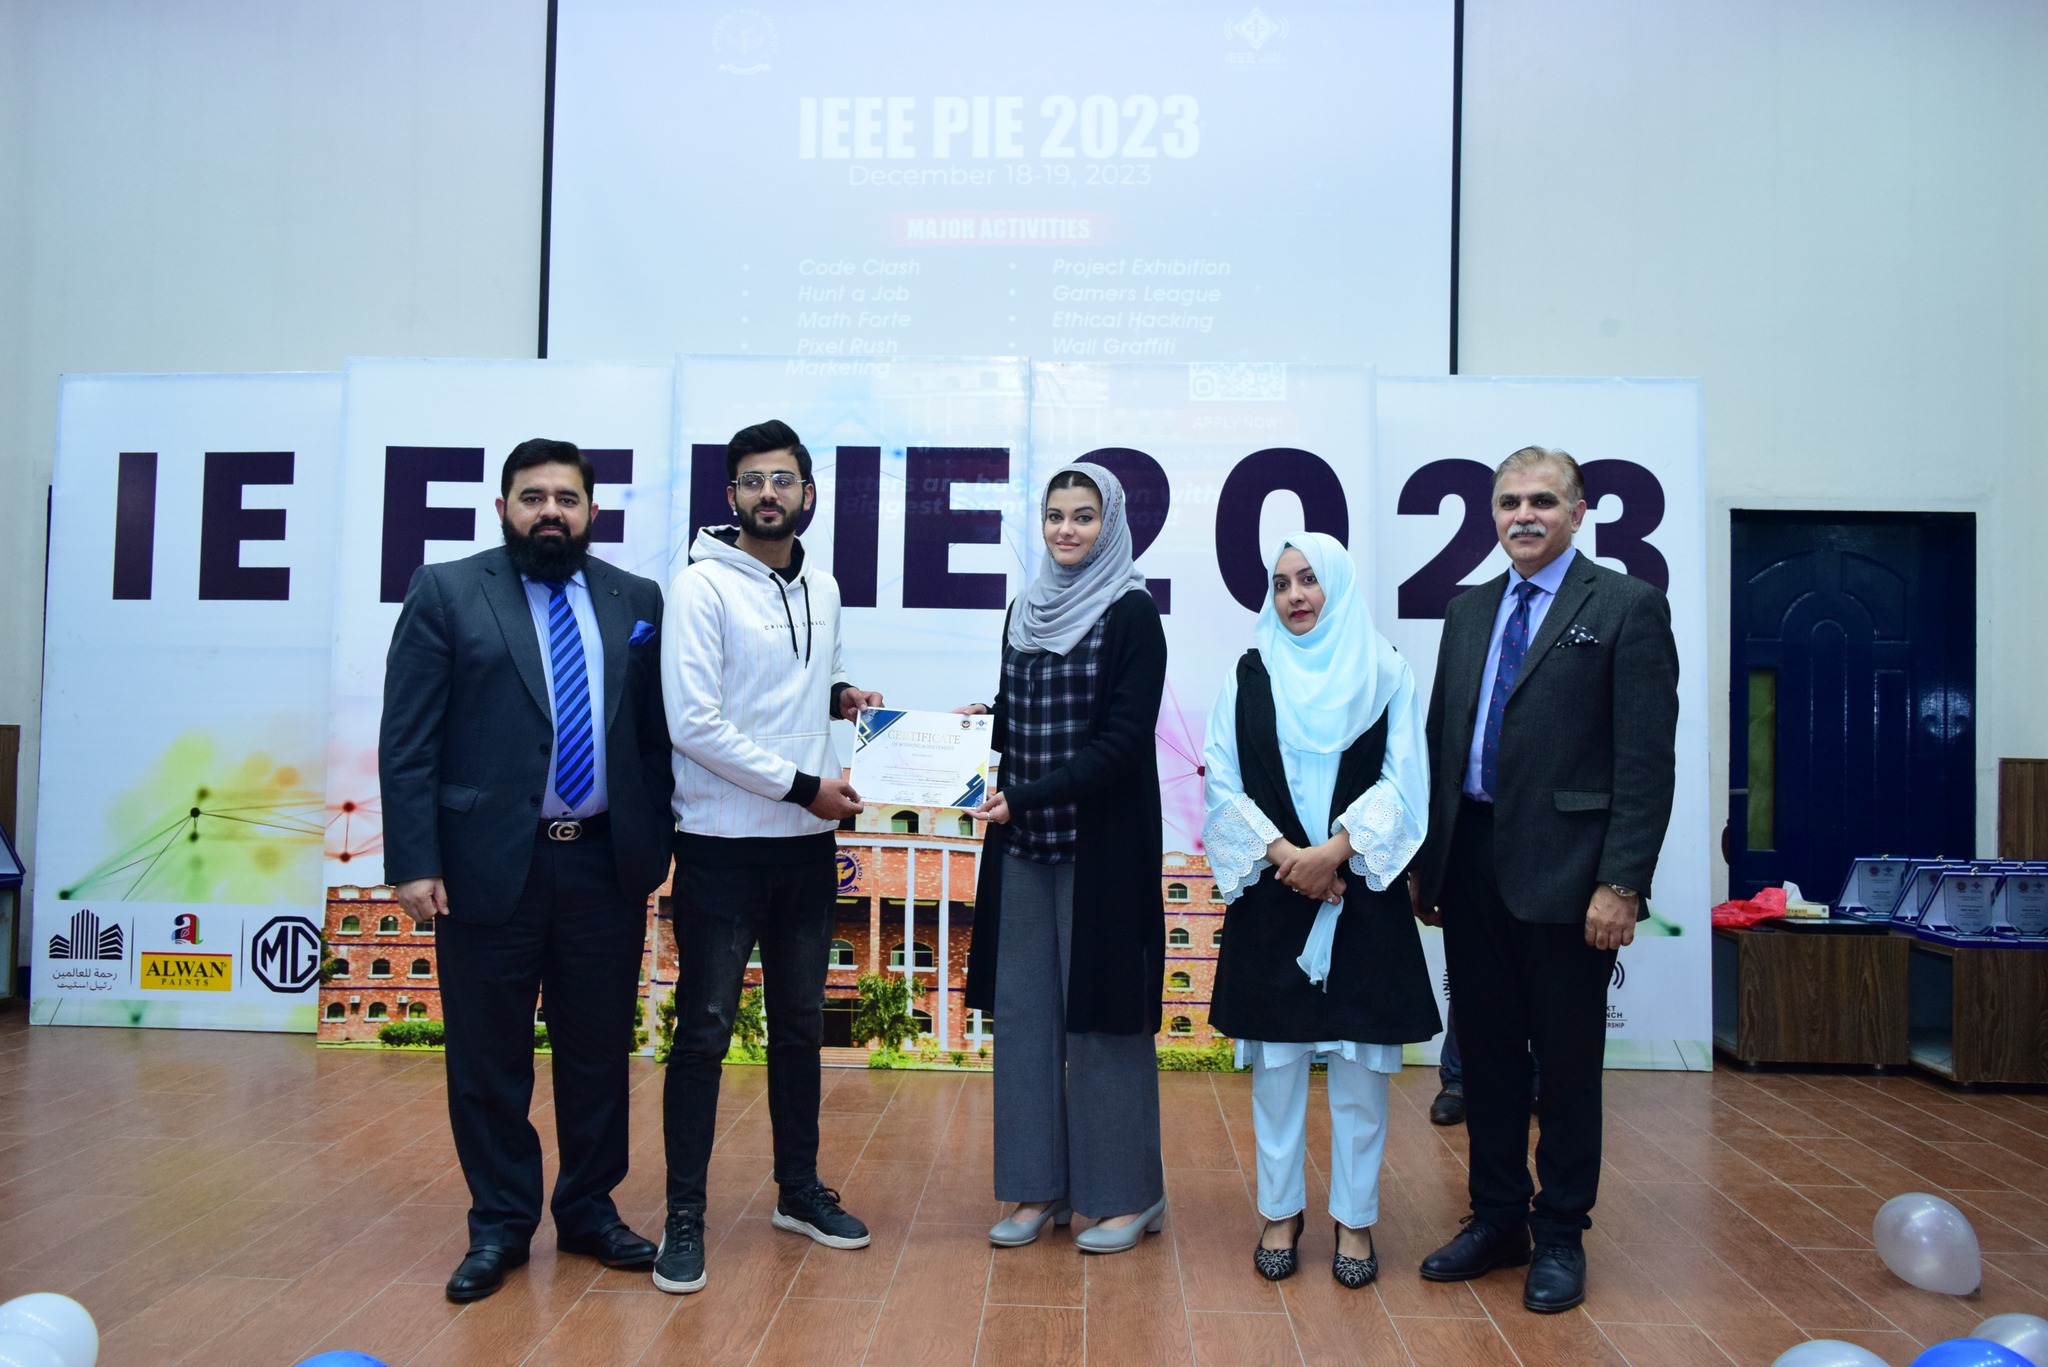 Prizes presented to the deserving winners and runnersup in IEEE pie 2023 event